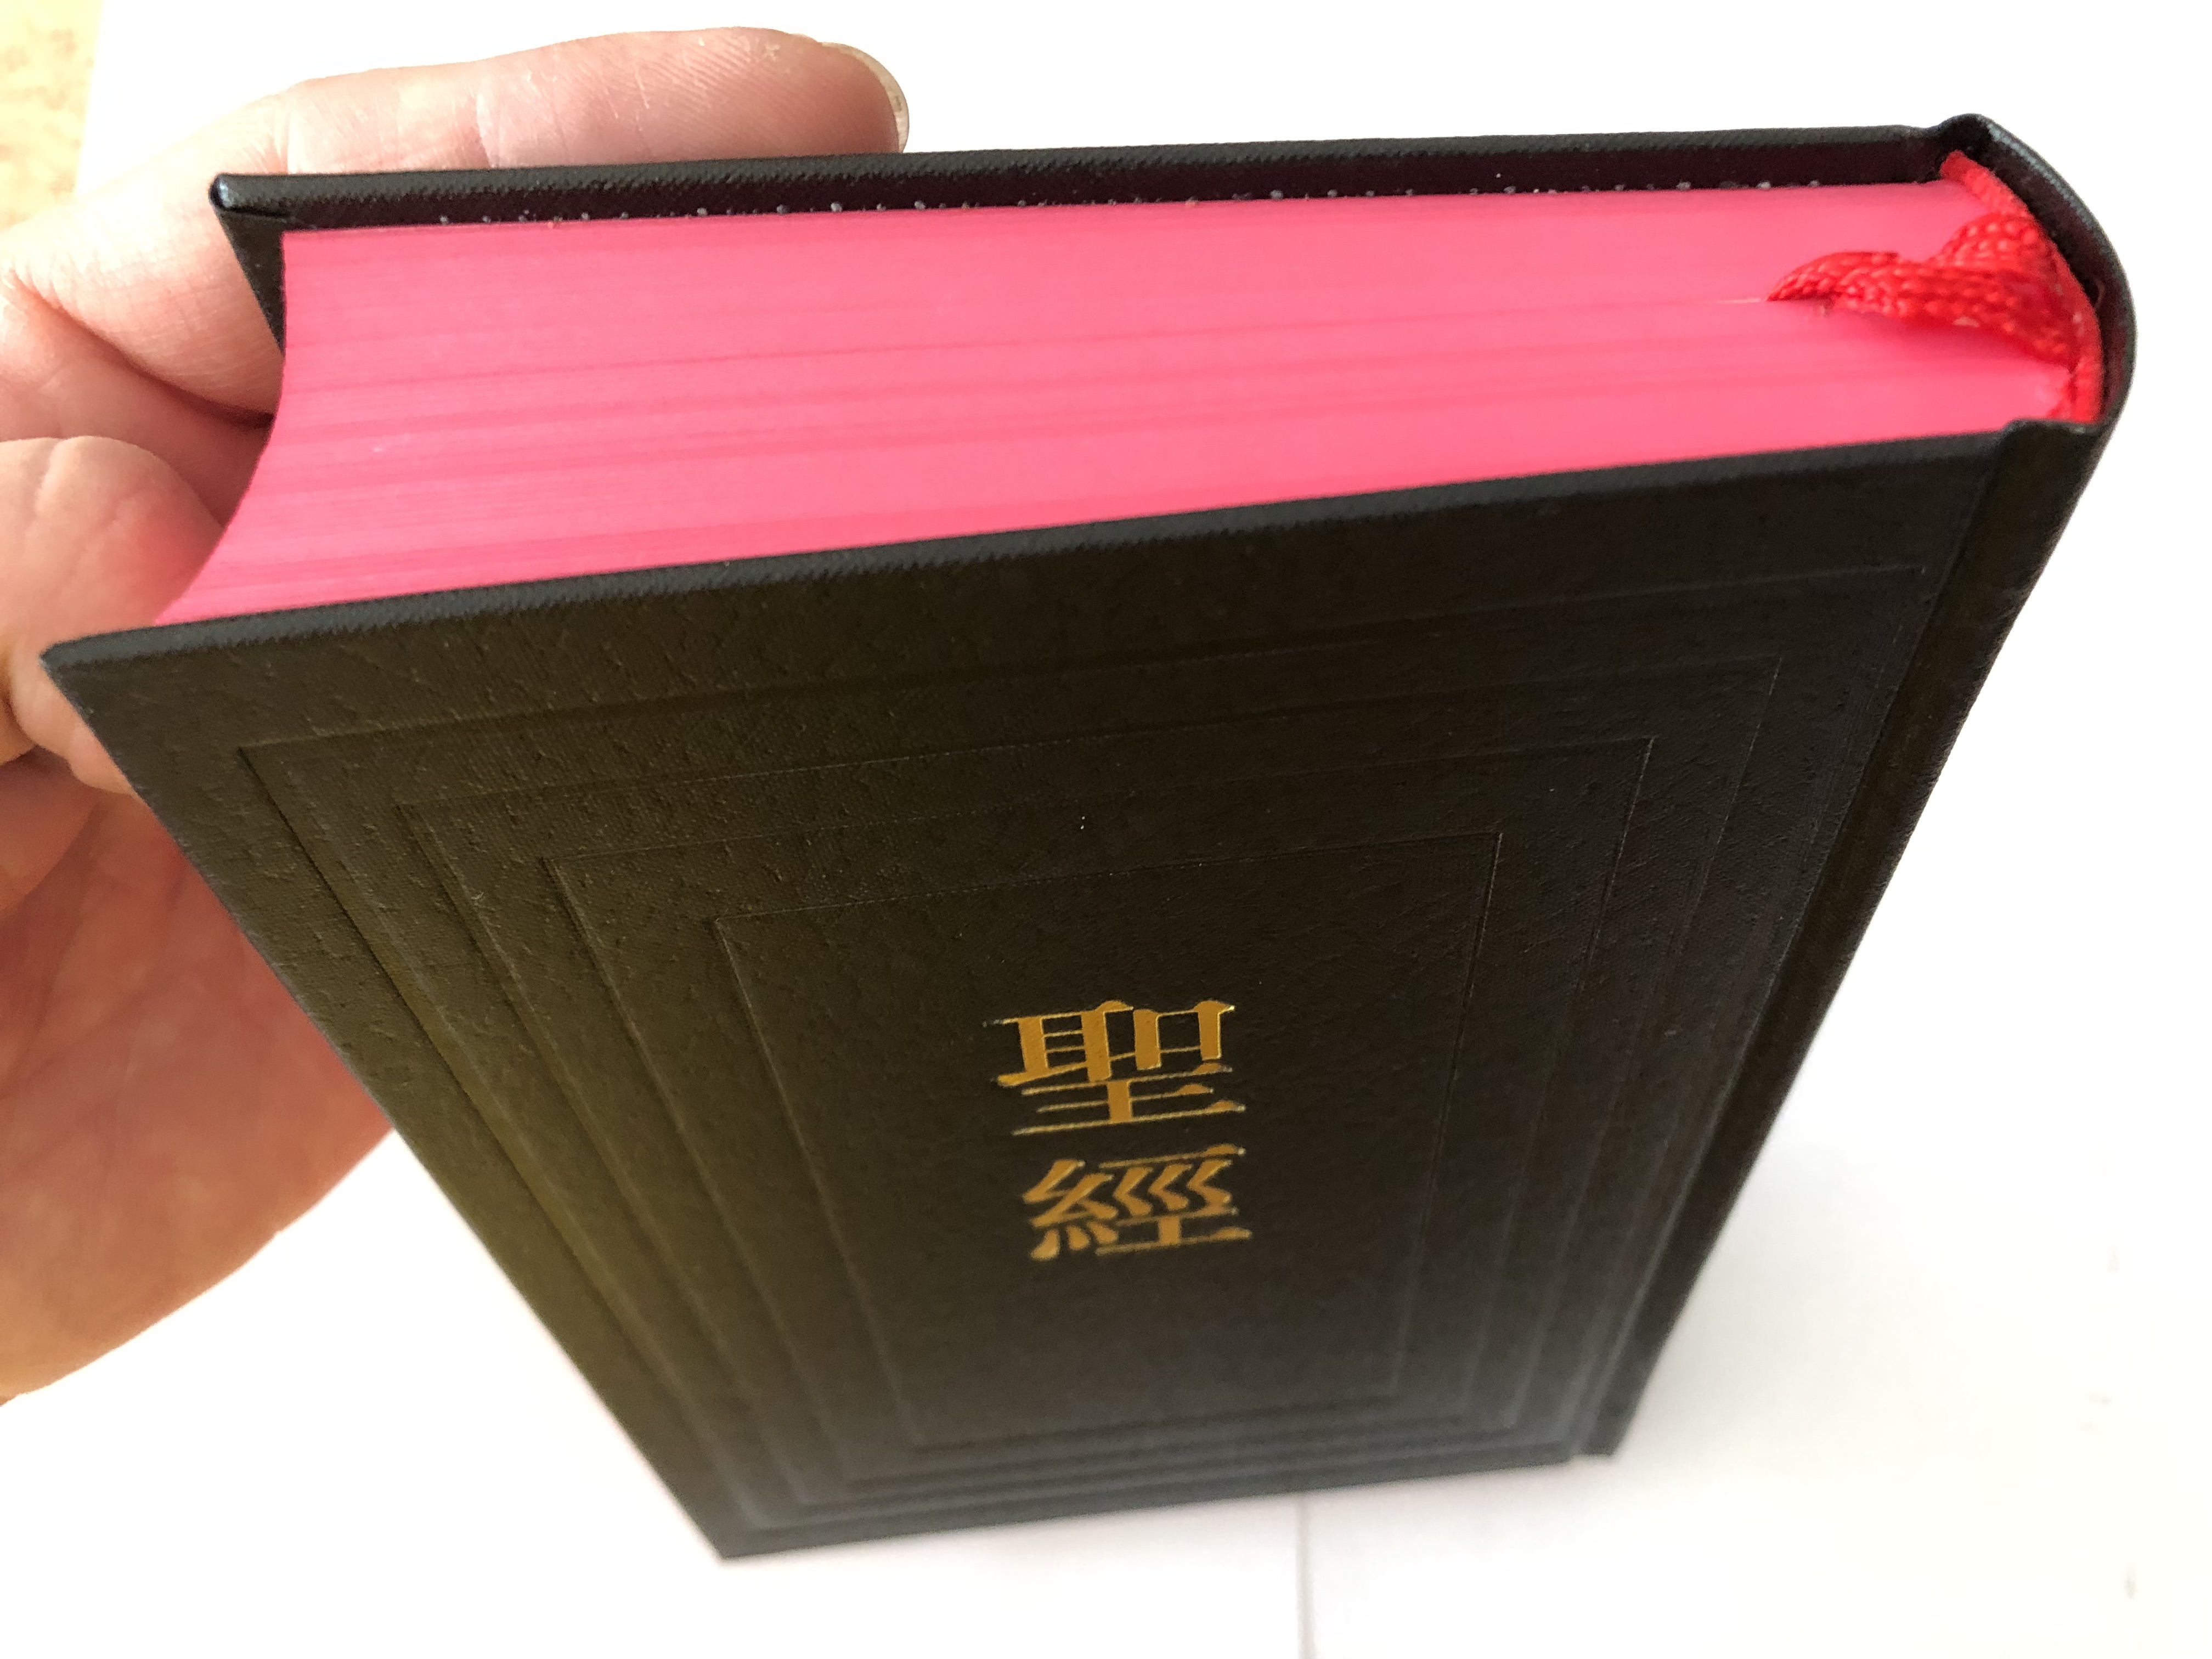 the-holy-bible-chinese-union-version-shen-edition-with-words-of-christ-in-red-black-hardcover-red-edges-cu63ar-bsm-2015-23-.jpg